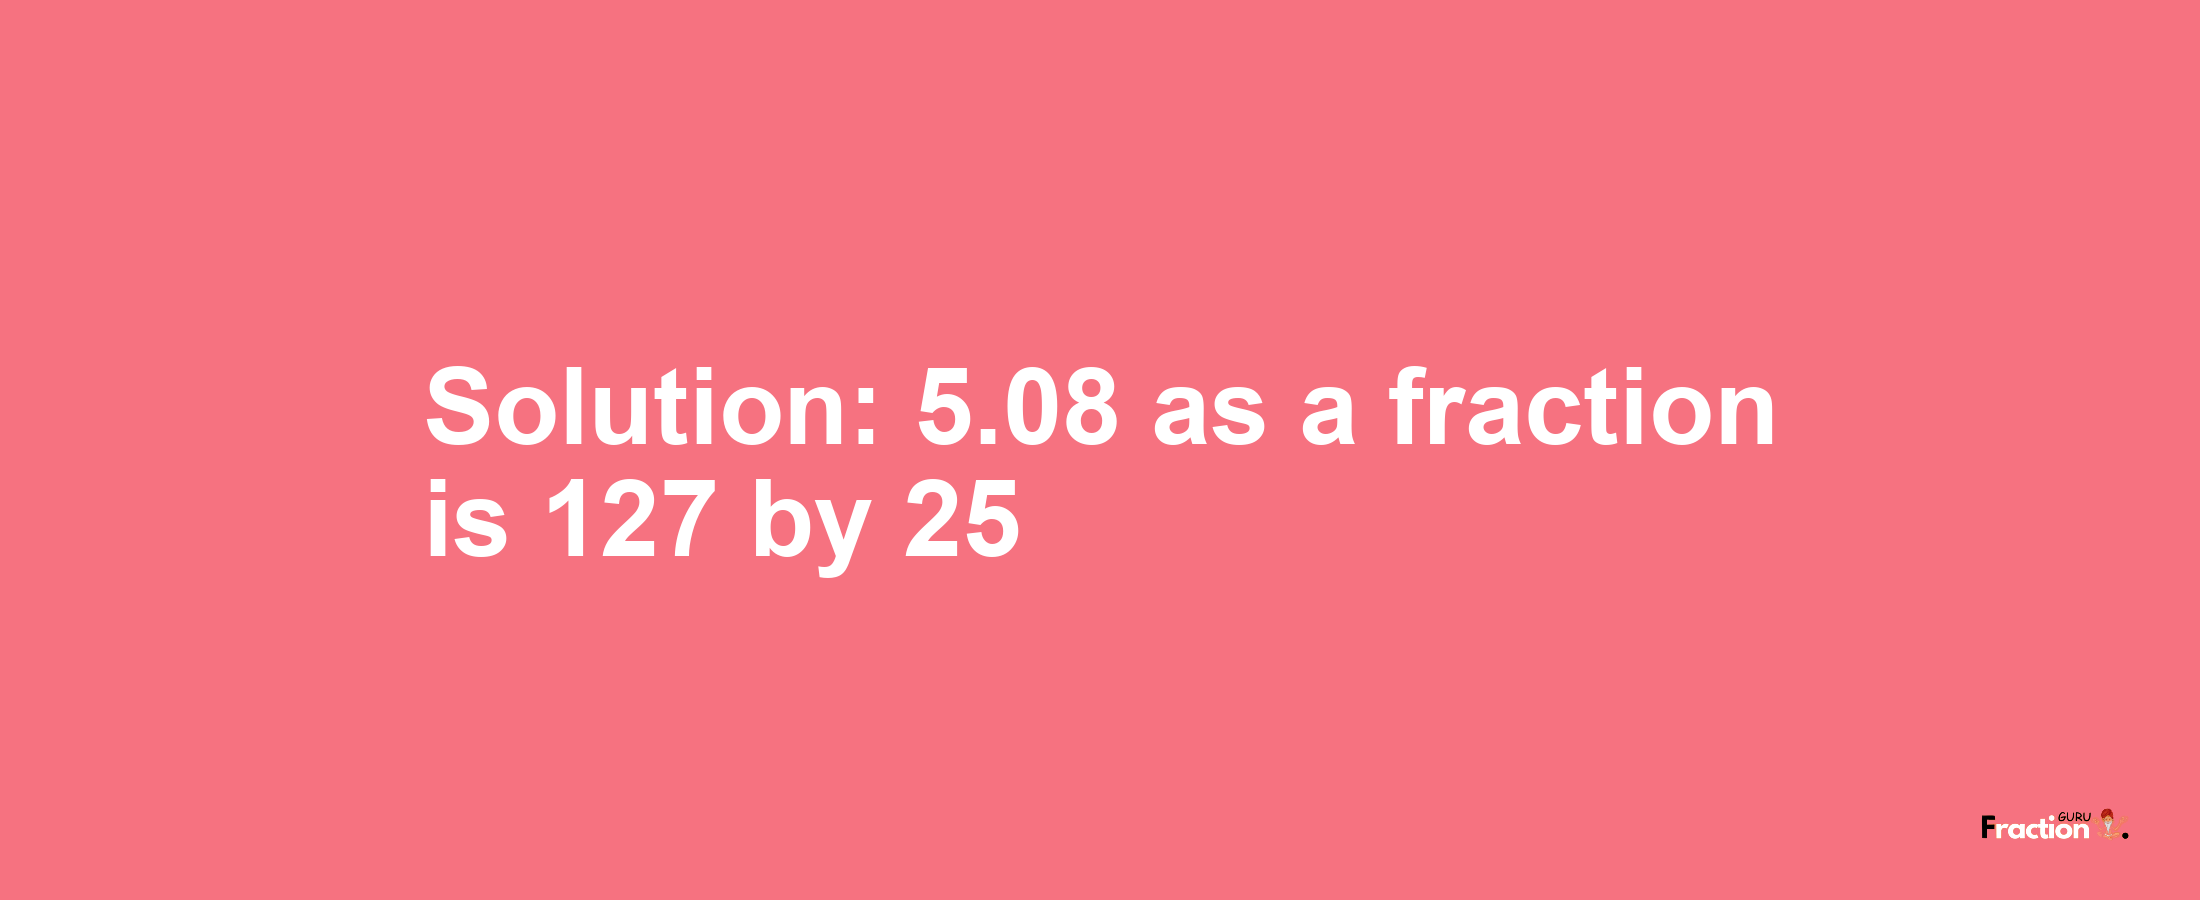 Solution:5.08 as a fraction is 127/25